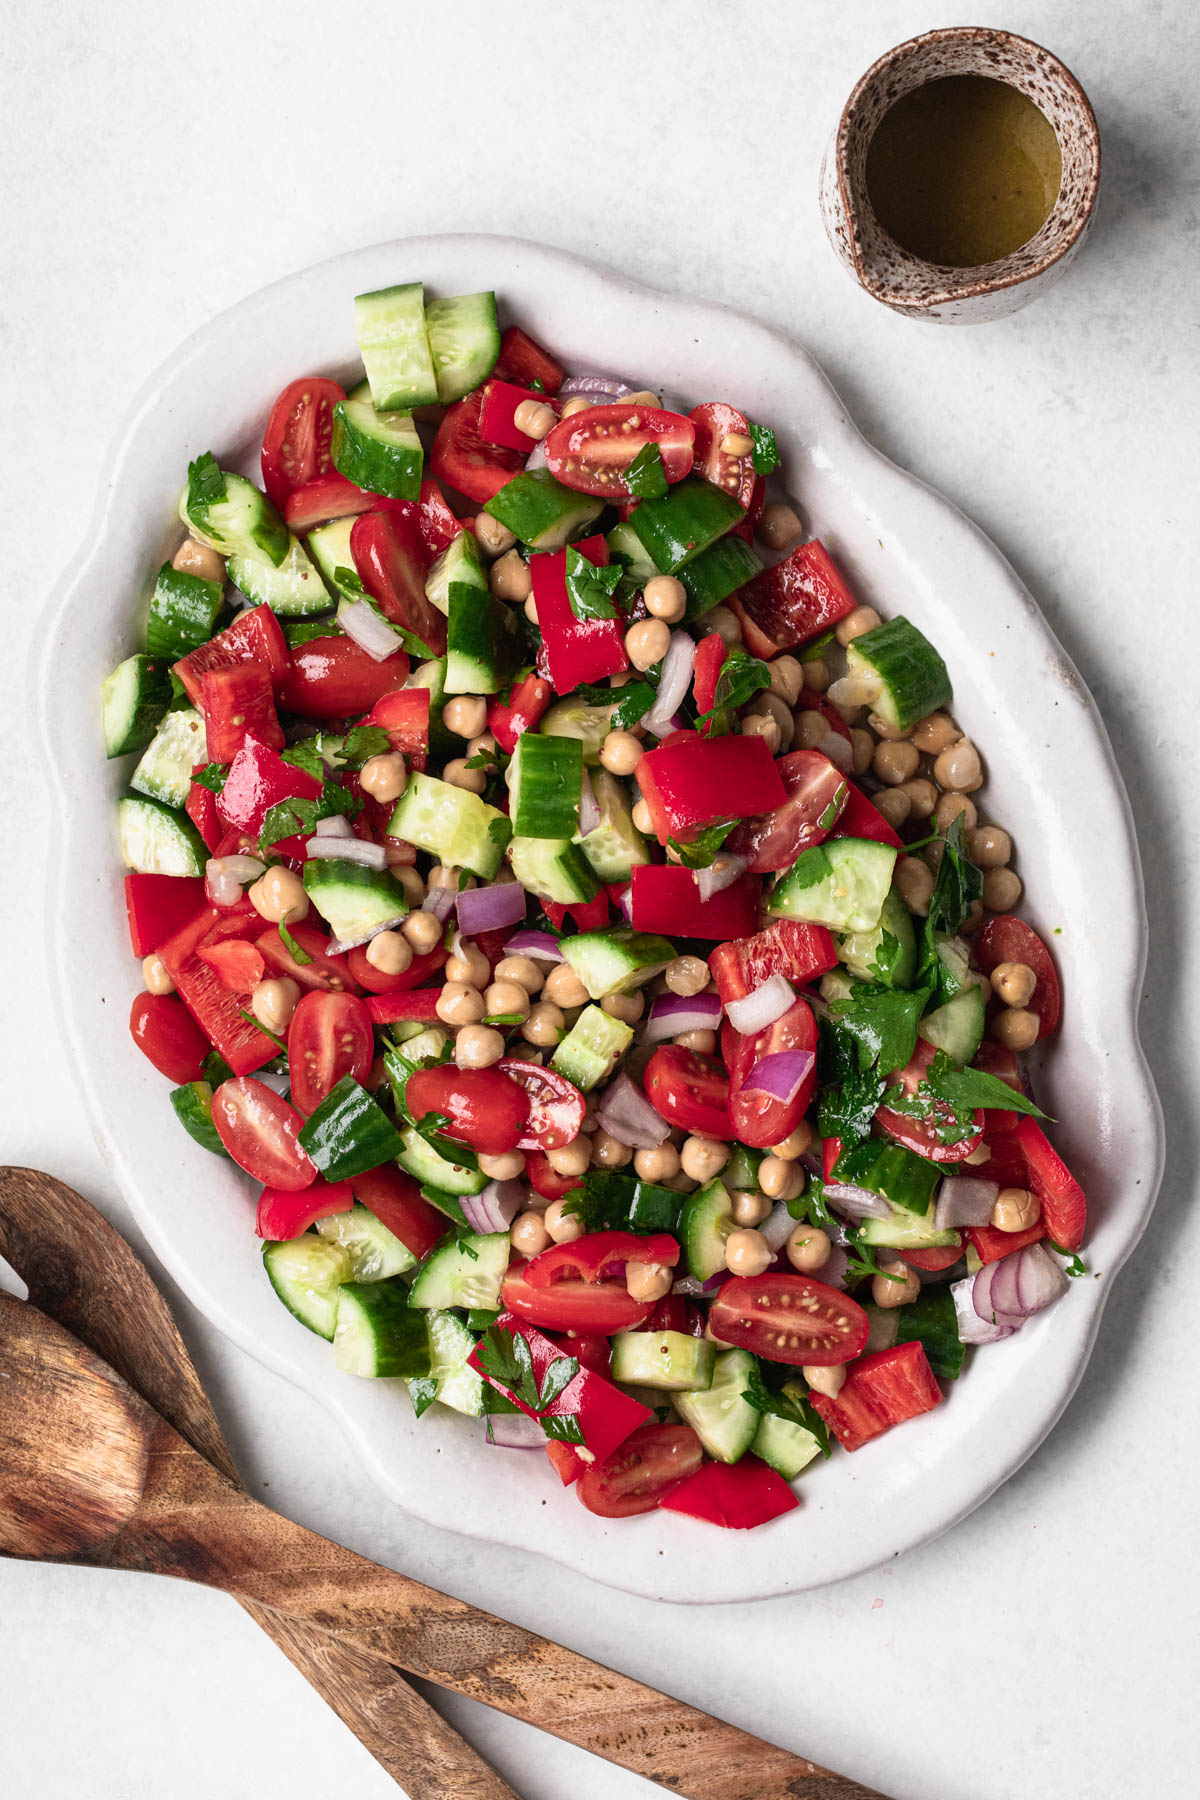 Chopped salad of cucumber, cherry tomatoes, red onion, parsley and chickpeas on an oval platter